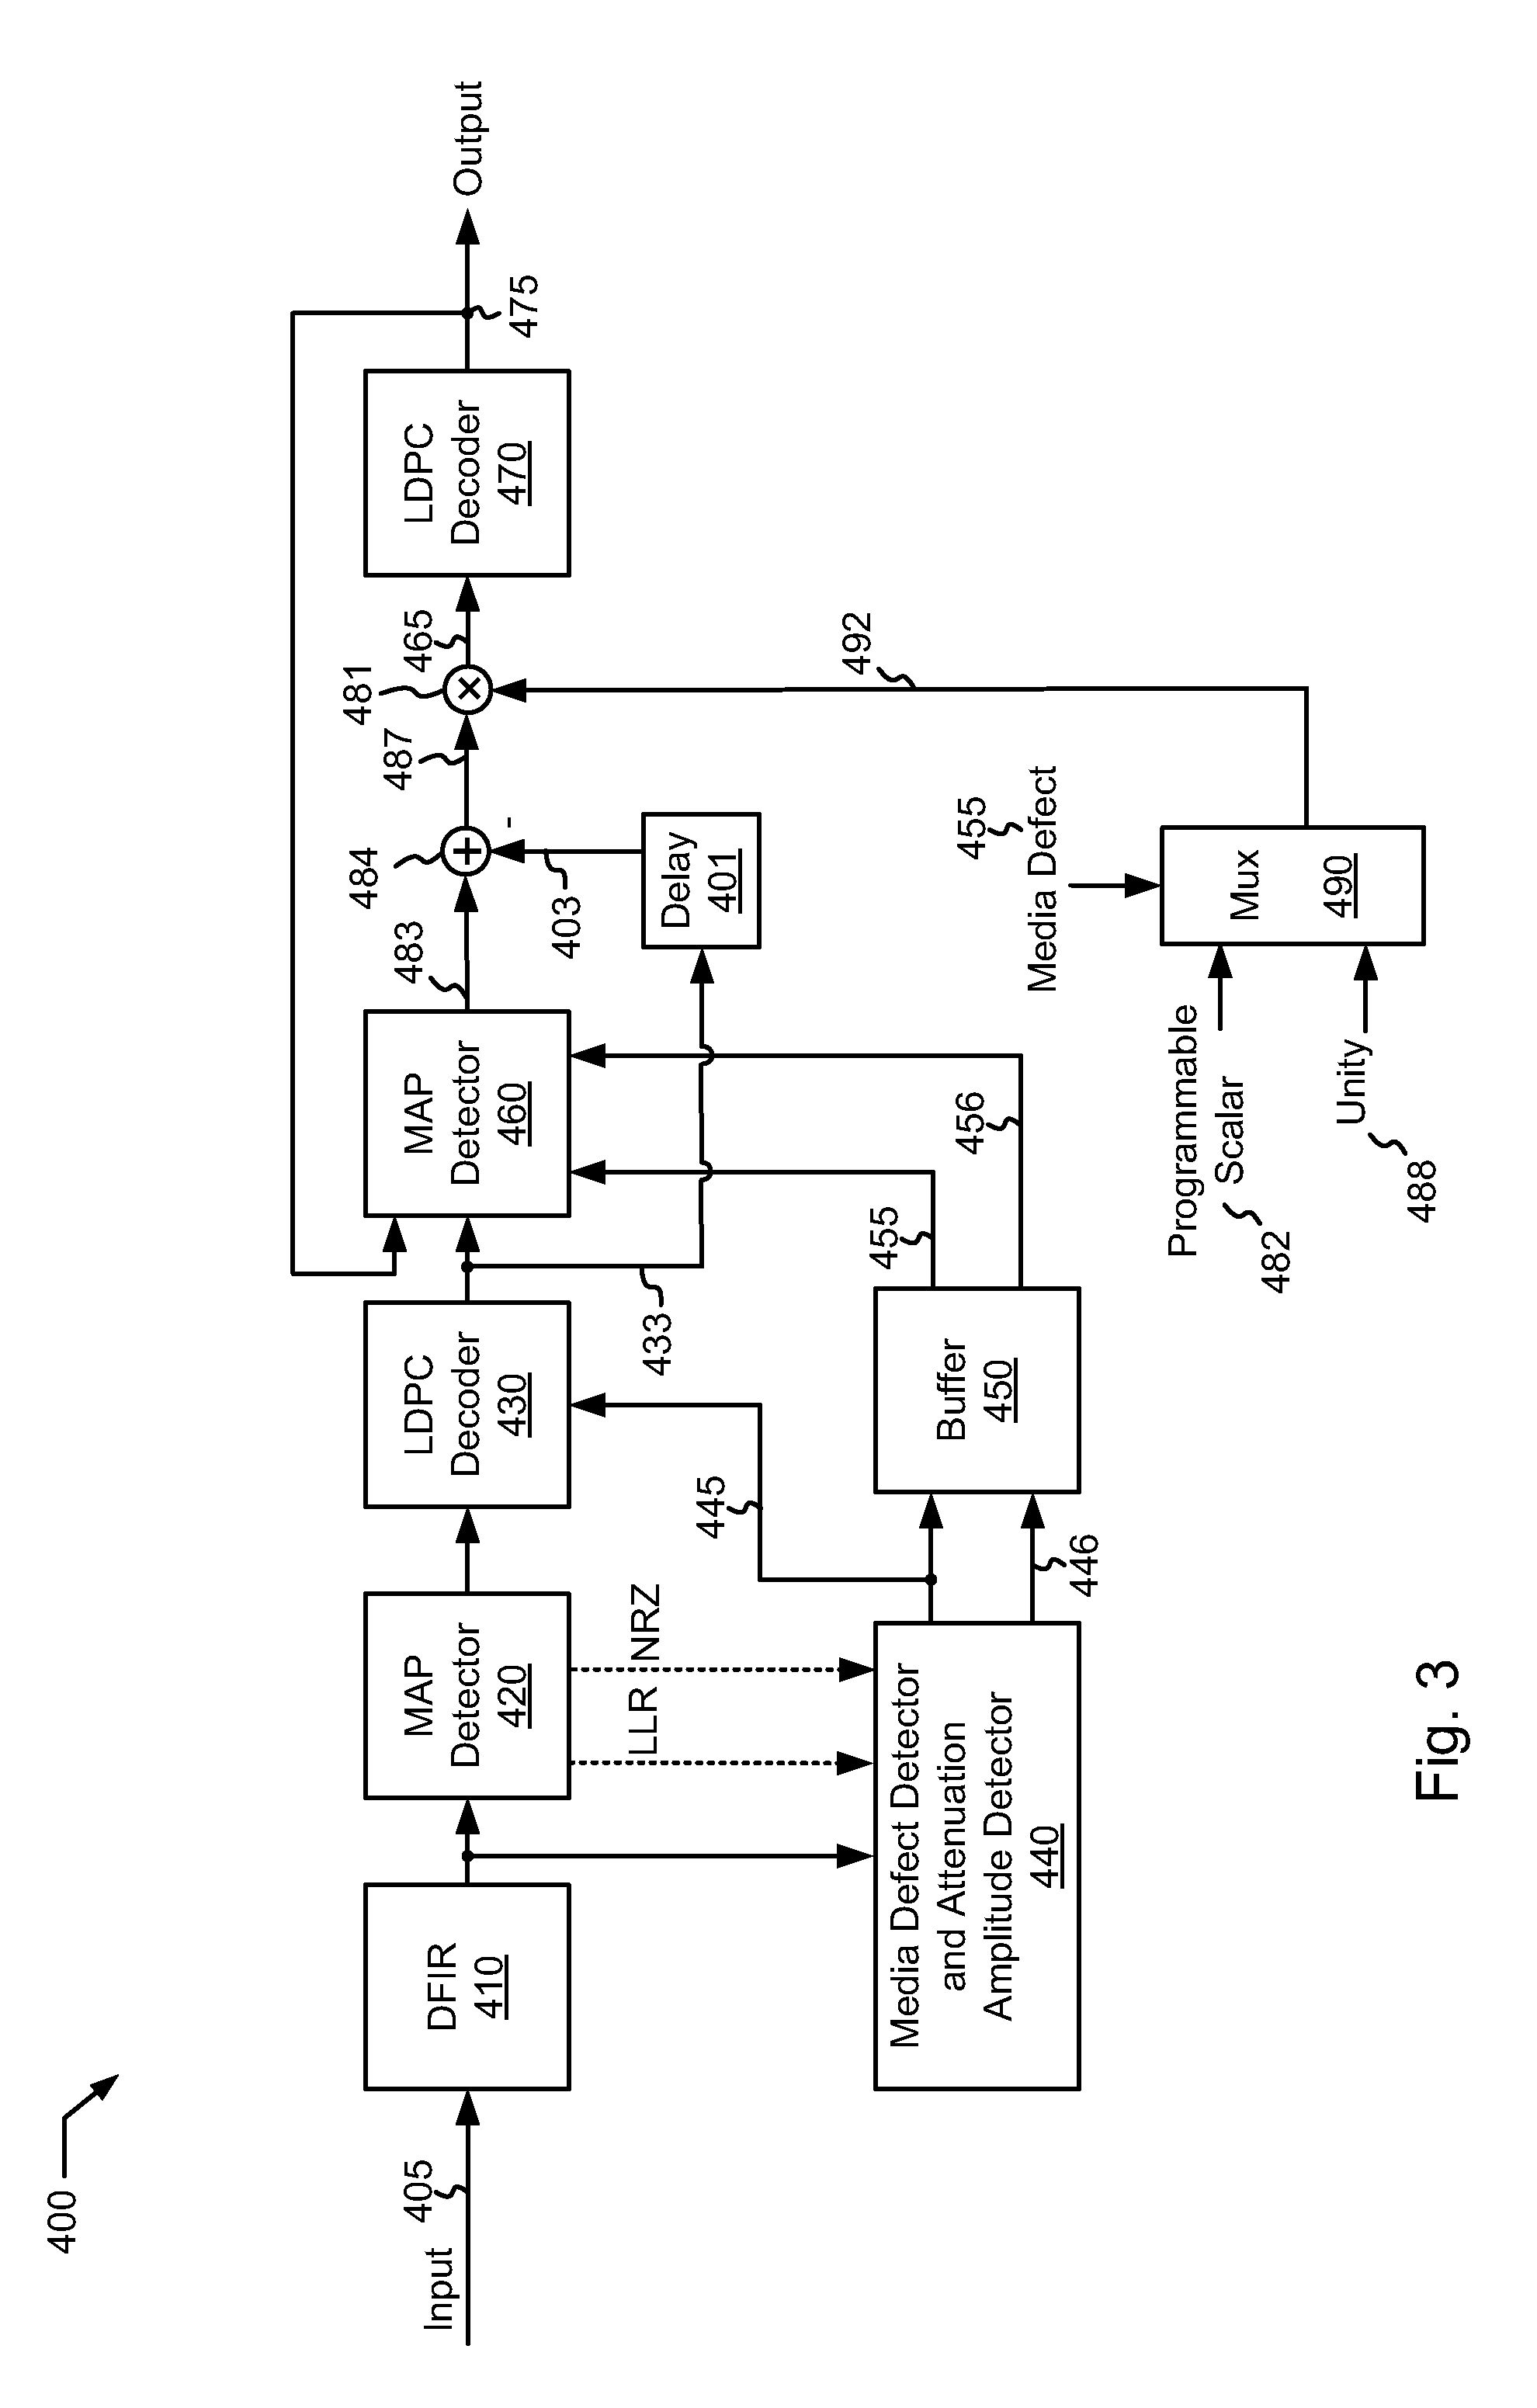 Systems and Methods for Recovering Information from a Defective Medium